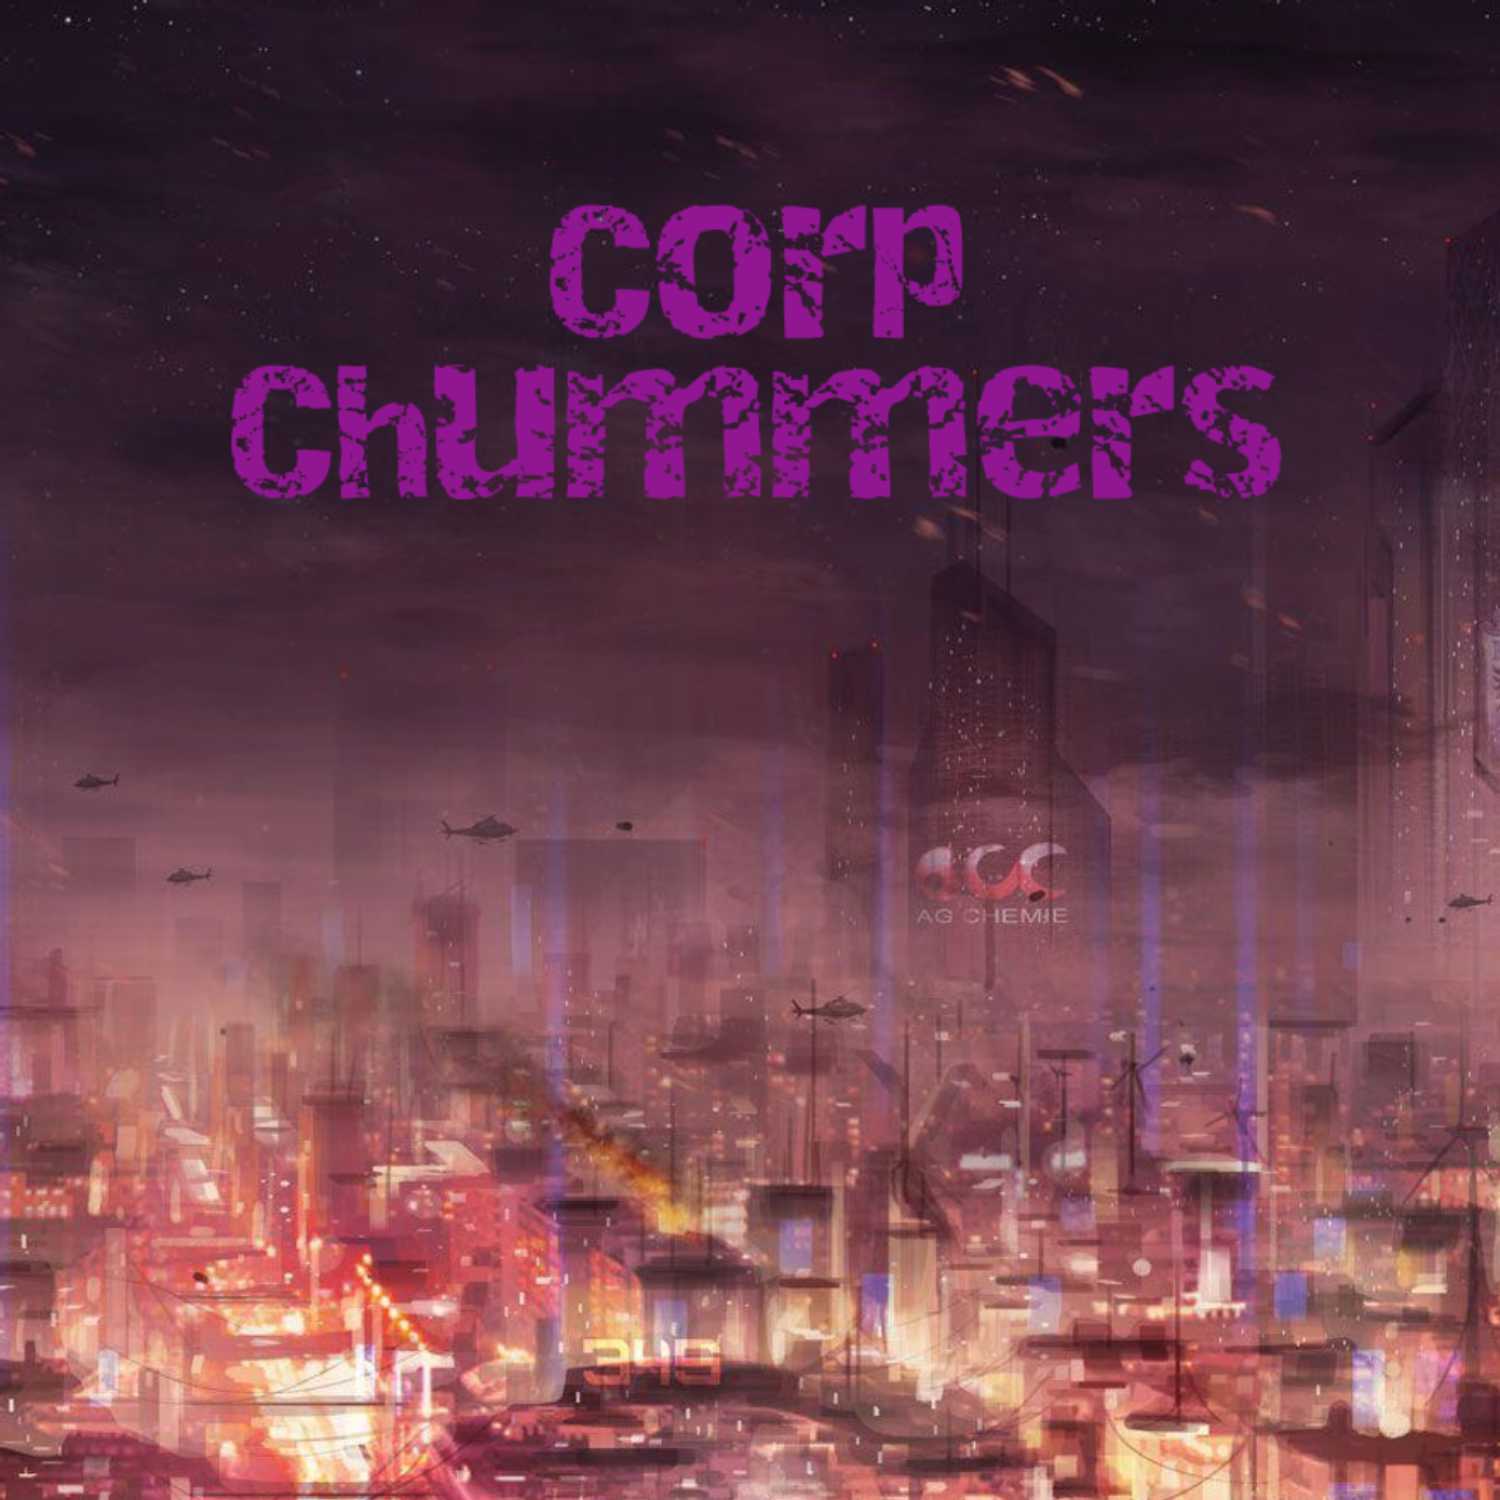 Corp Chummers